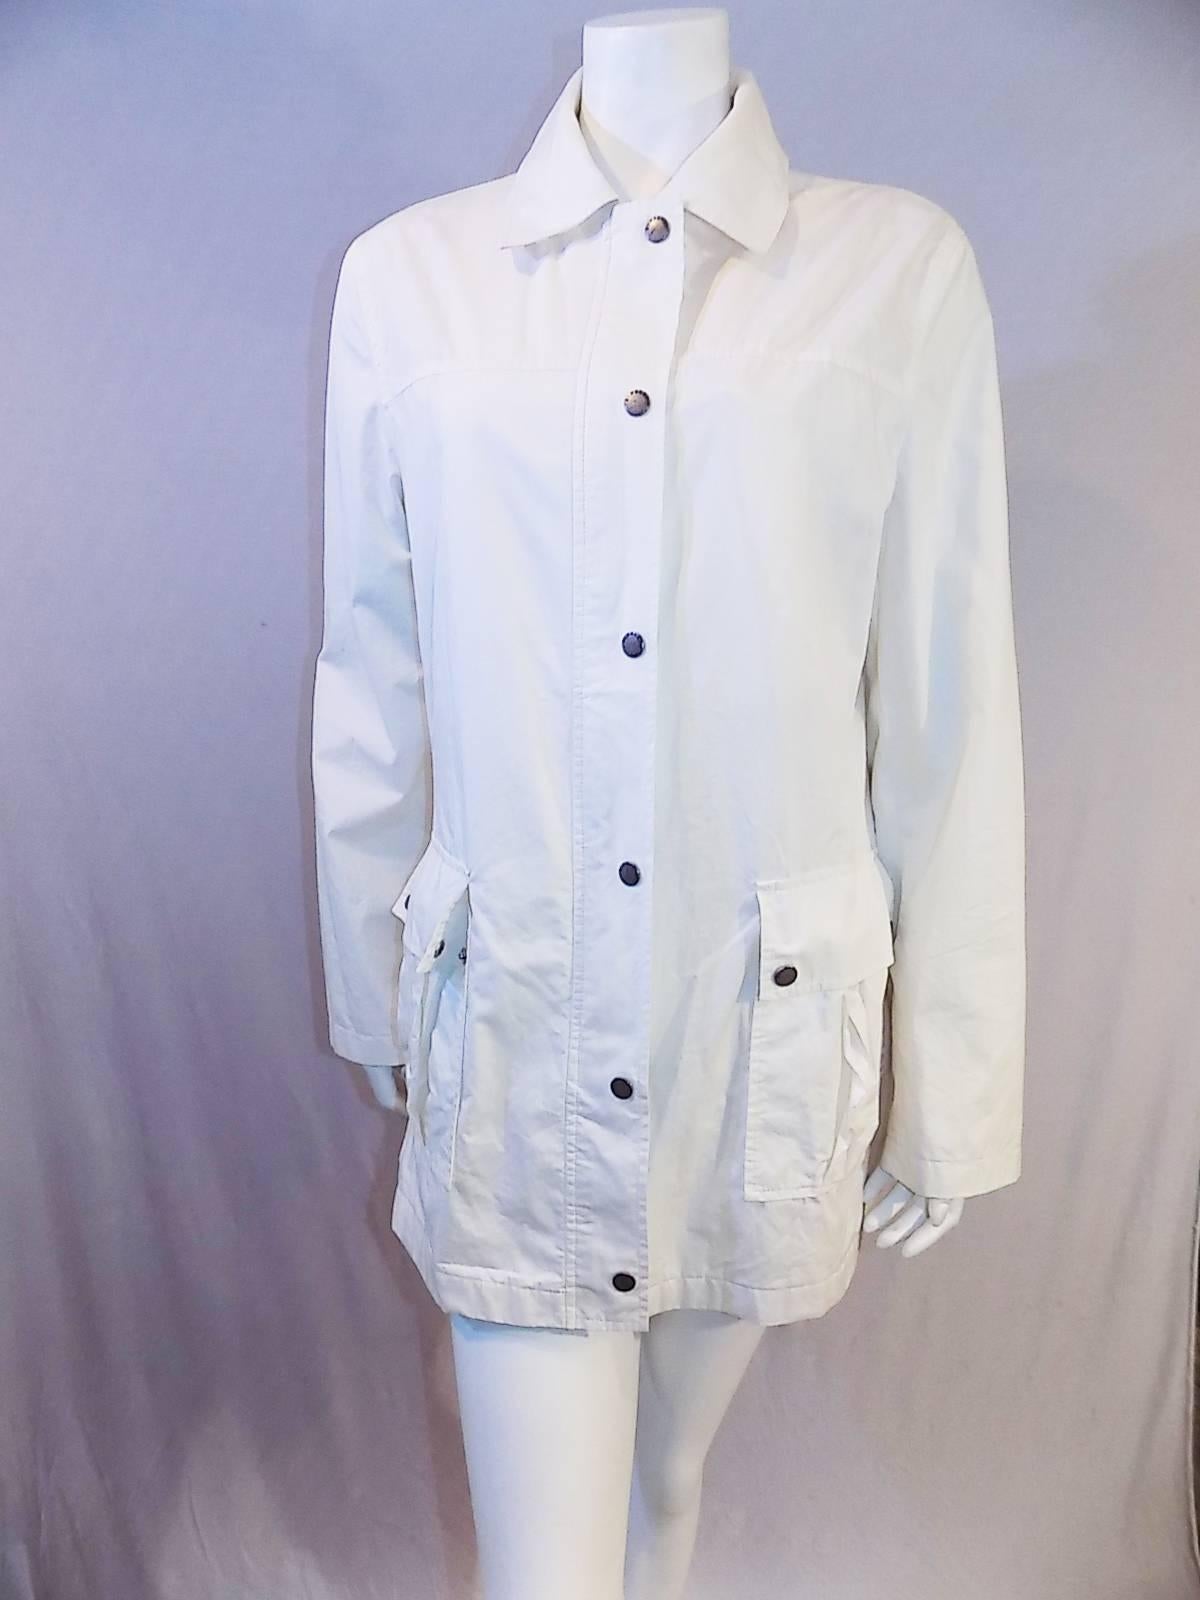 Fabulous white Burberry rain jacket with pink novacheck lining. Excellent condition! Outer coat is 100% cotton with Poly lining . Concealed zipper front closure featuring Burberry logo engraved on the zipper pull. Zipper flap over with logo snaps.